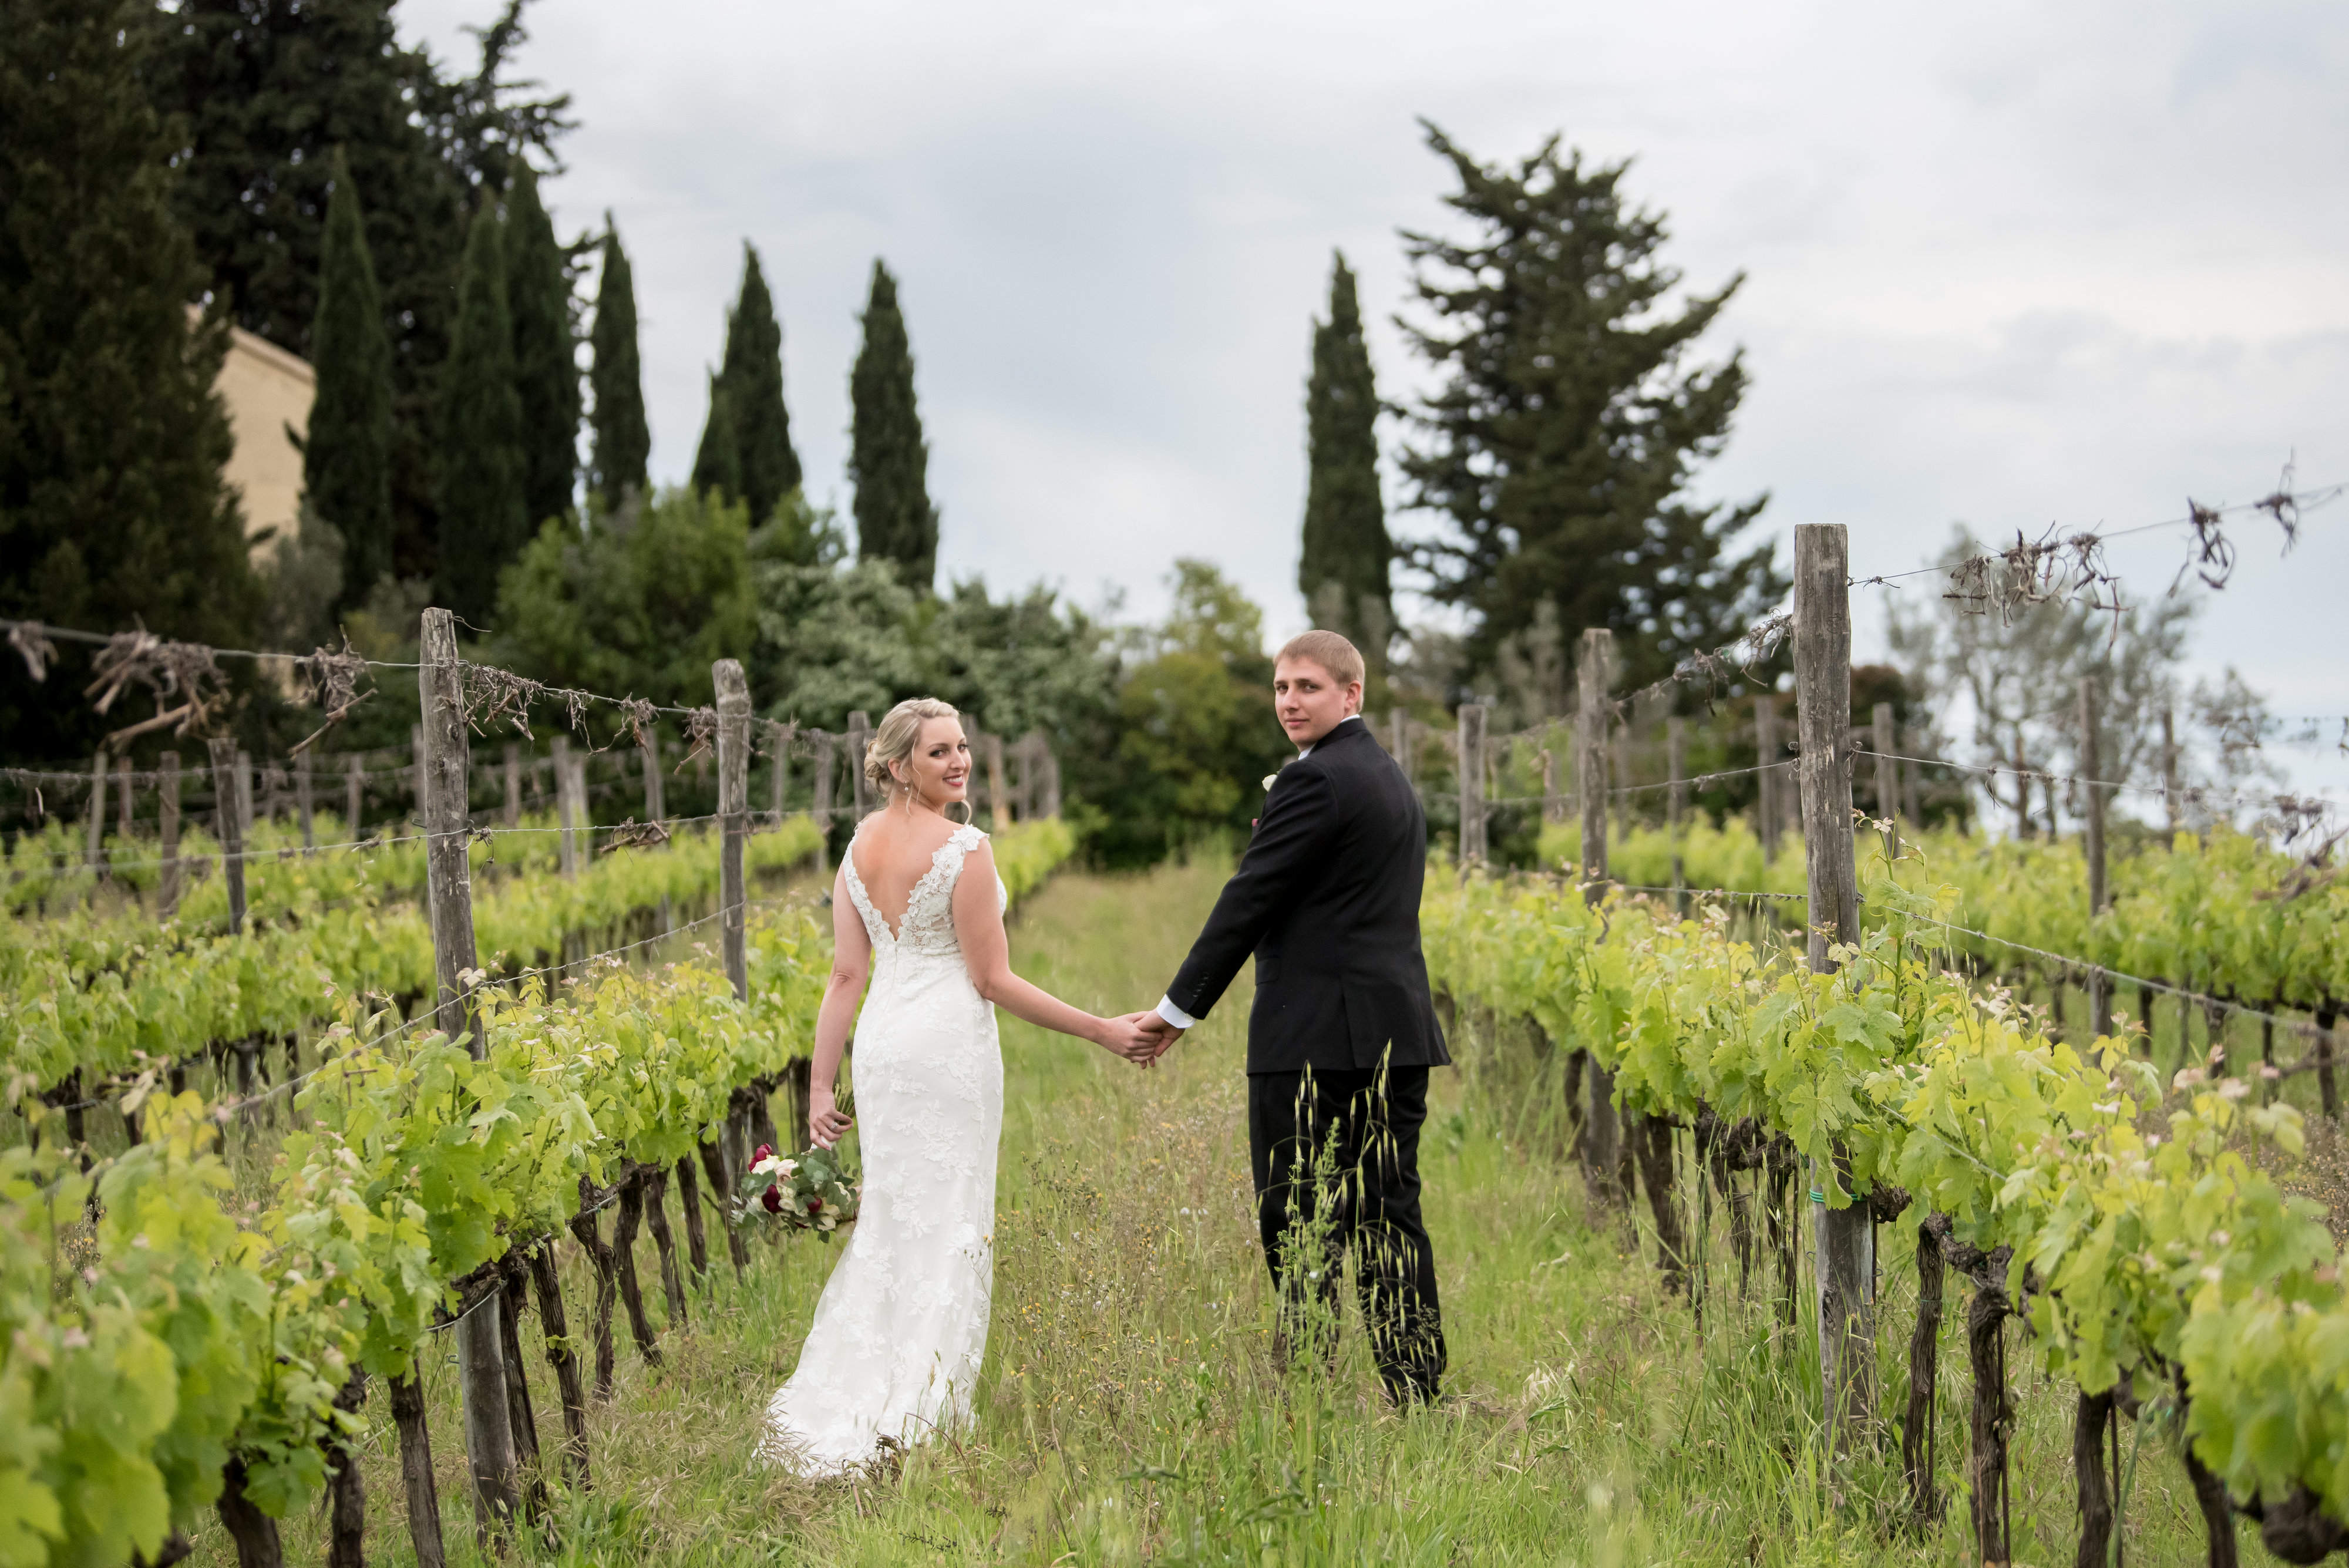 Kayla and Anthony - Intimate wedding in a vineyard